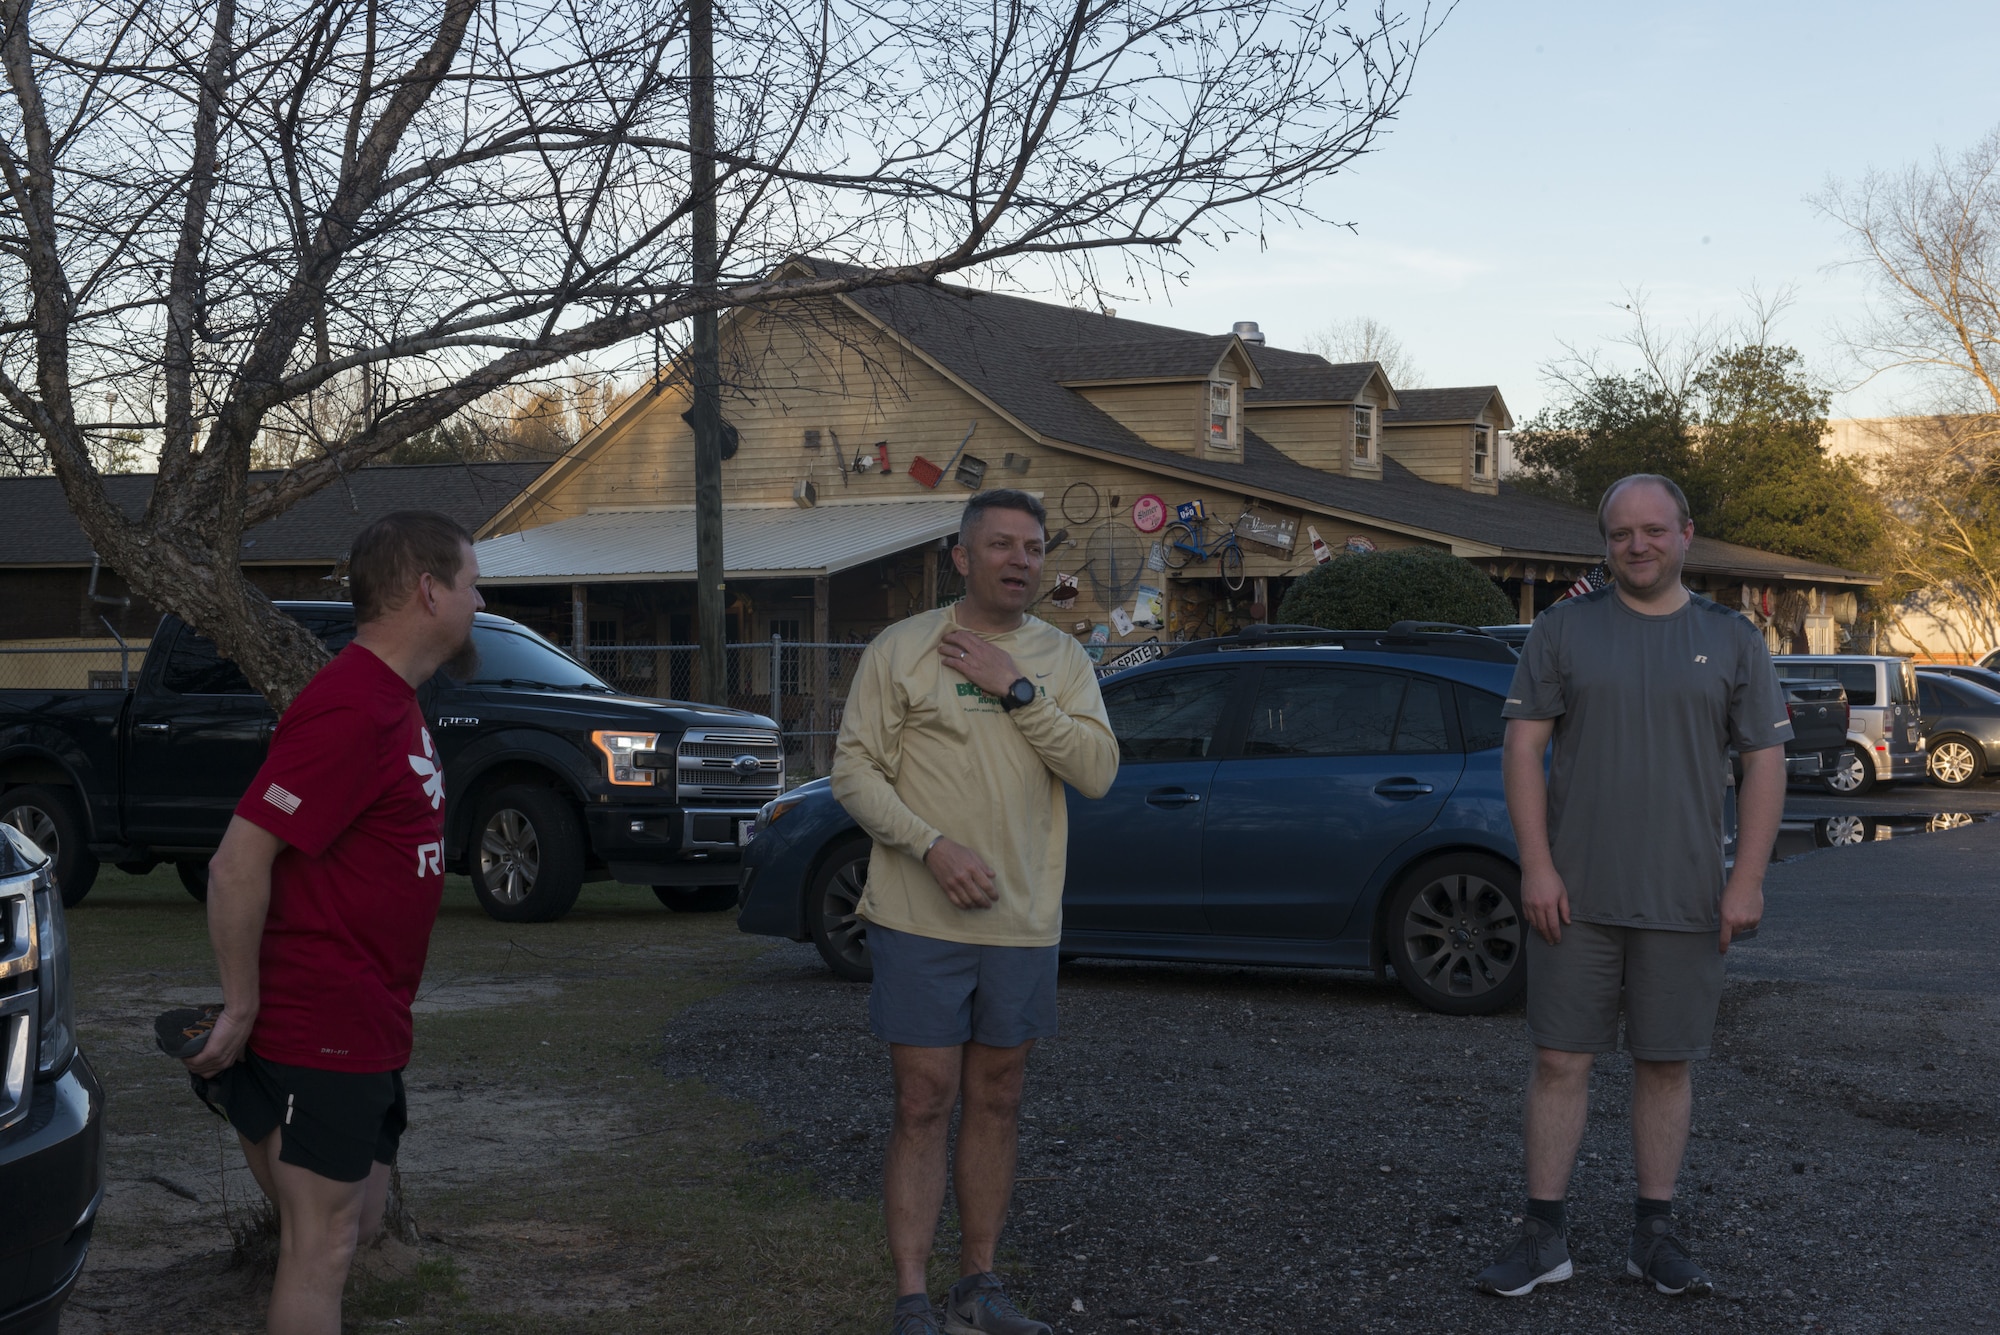 Runners of the Red White and Blue running group warm-up and stretch before a run in Sumter S.C., Feb. 25, 2019.